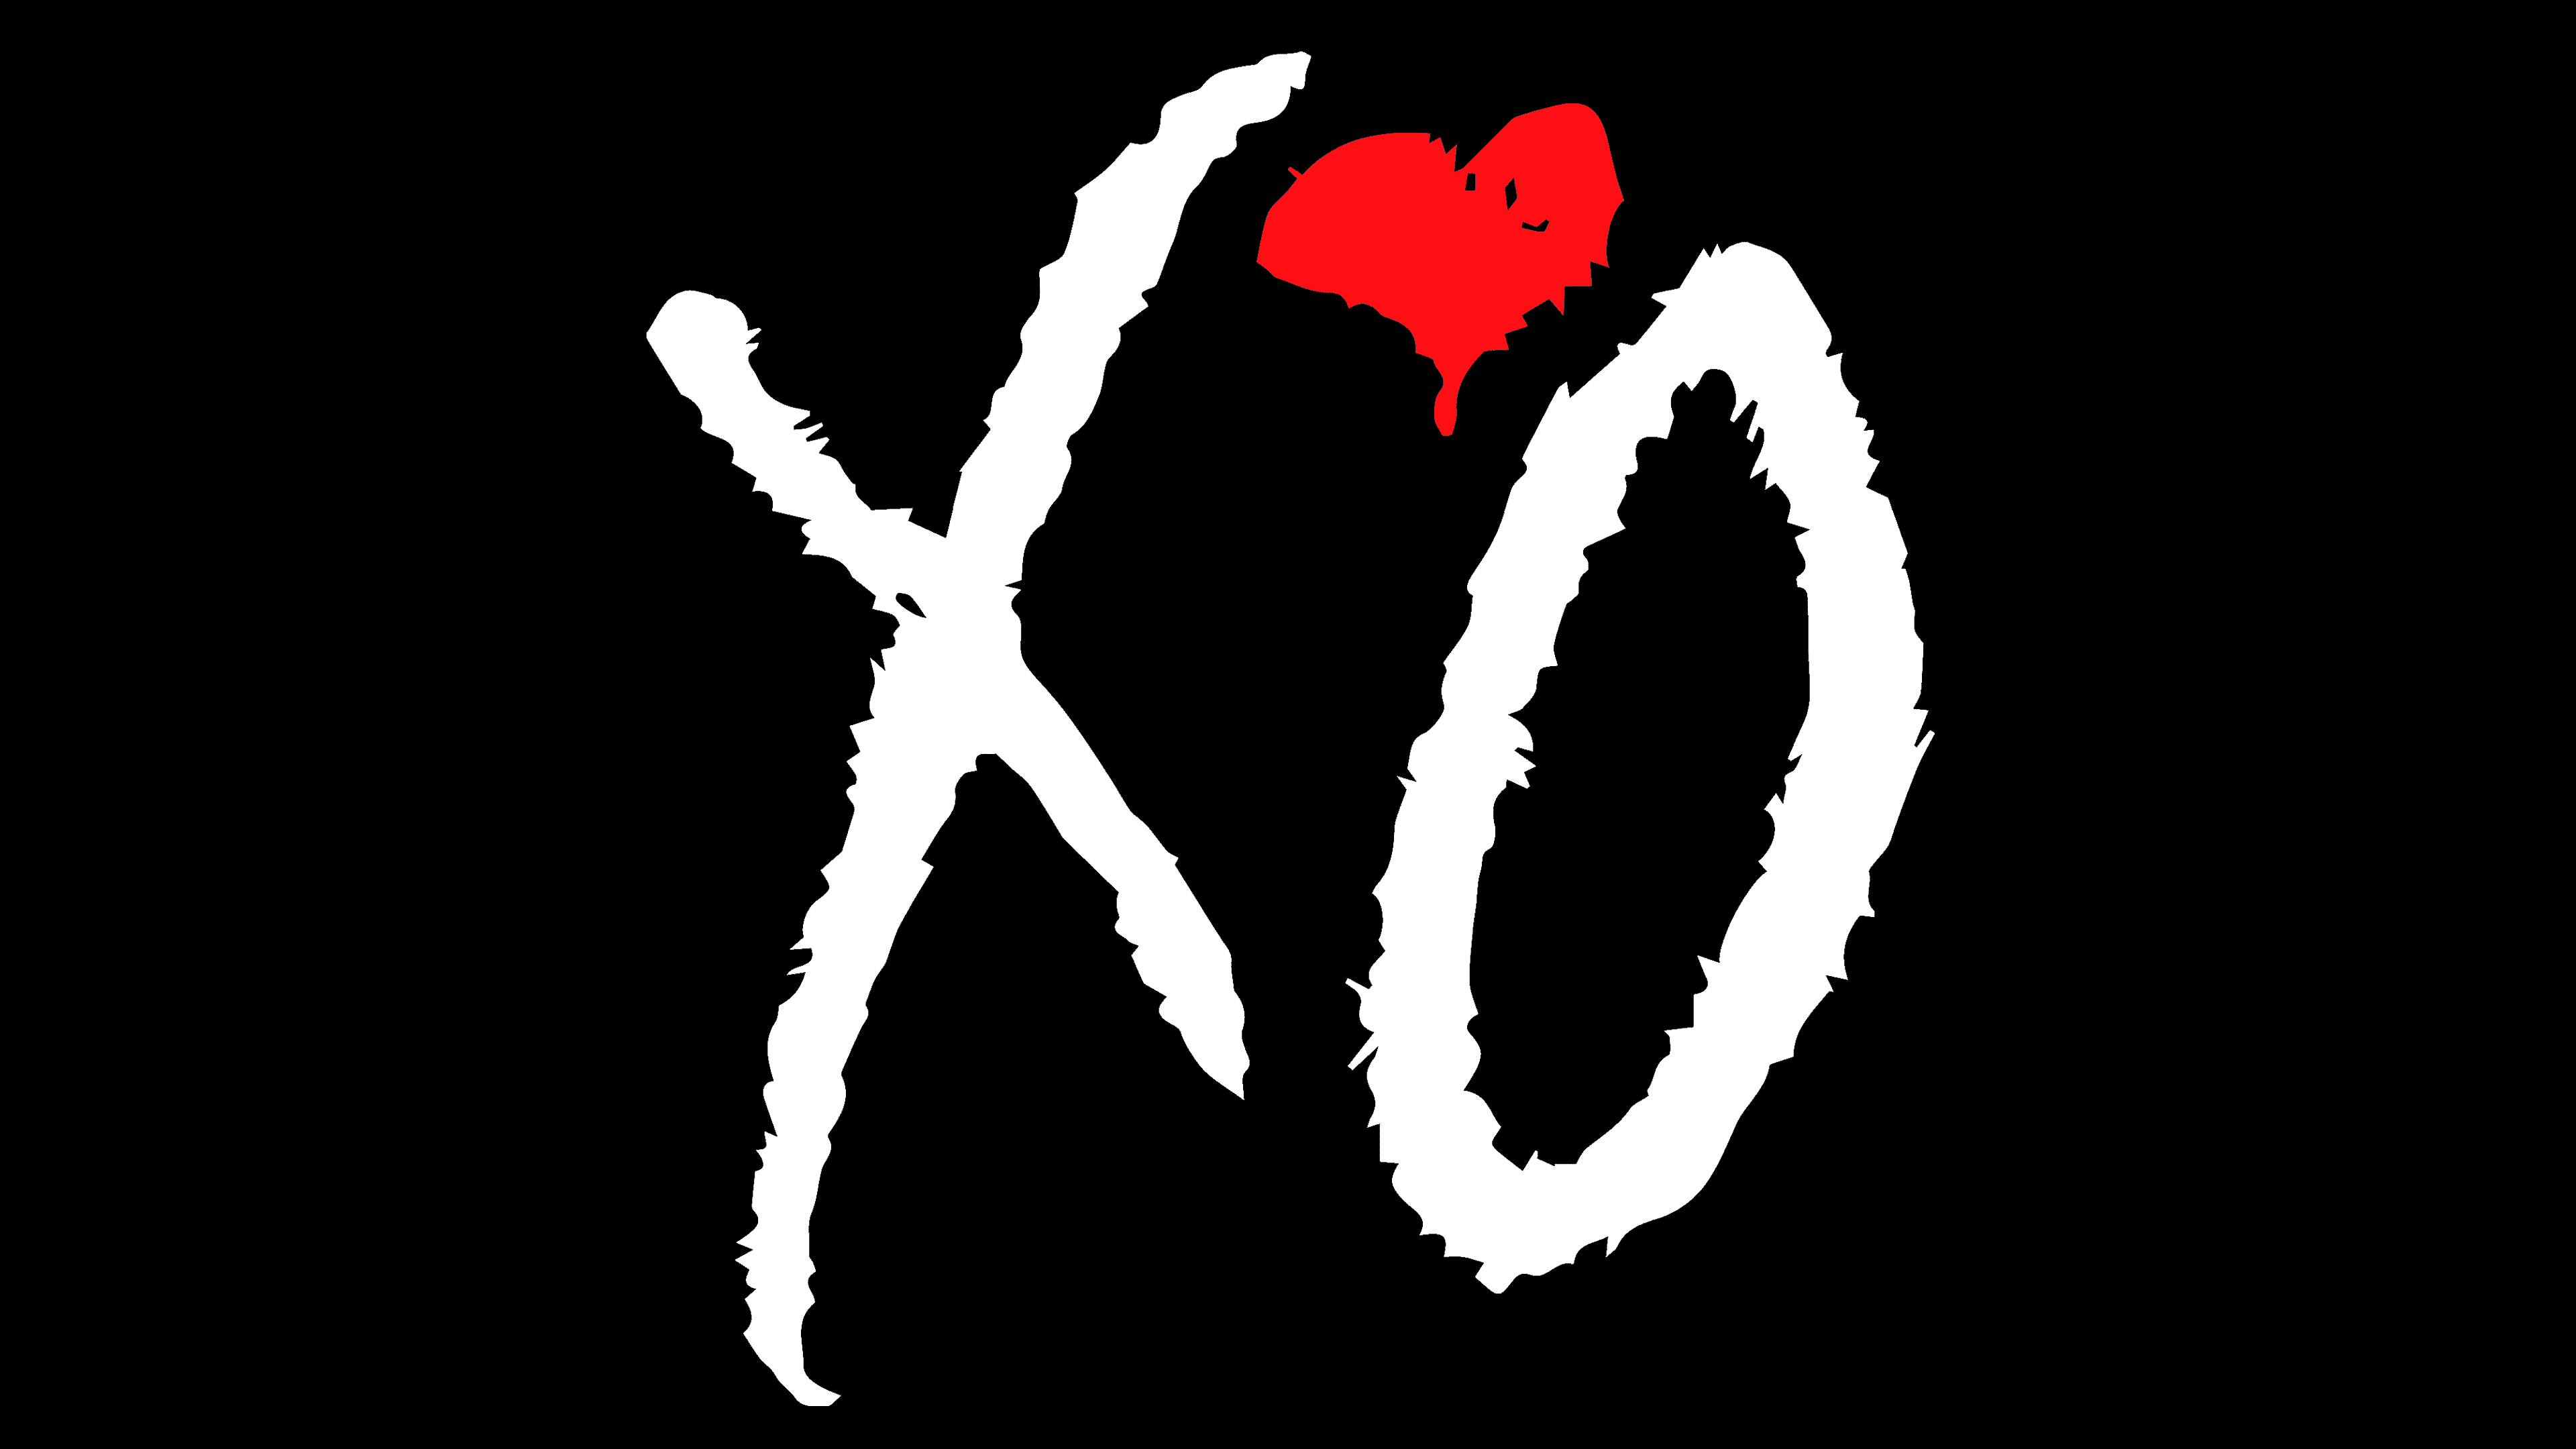 XO Logo, symbol, meaning, history, PNG